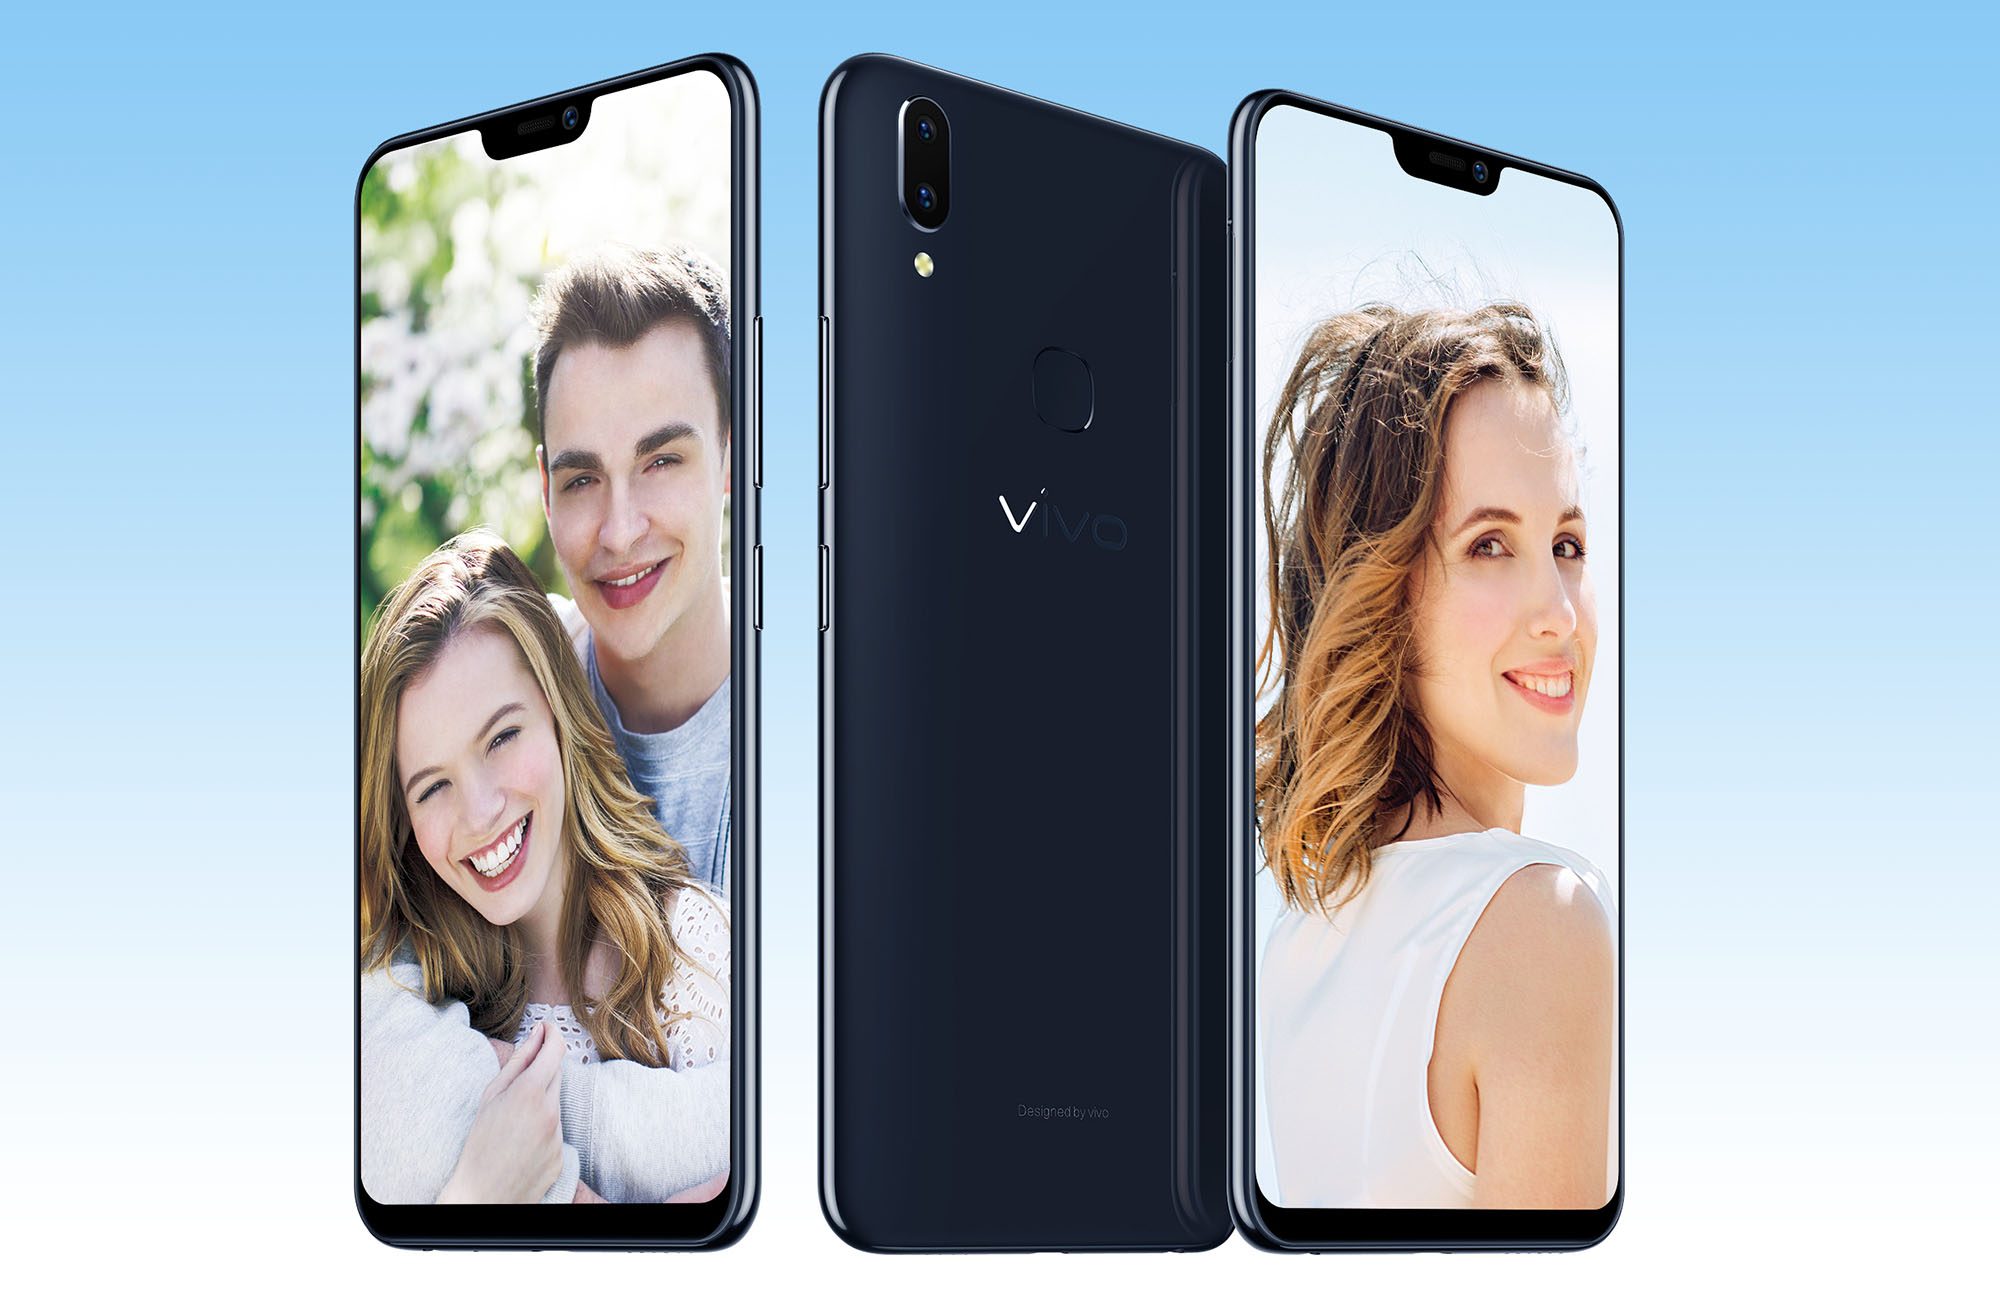 5 innovative features the Vivo V9 that leads the future in mobile technology